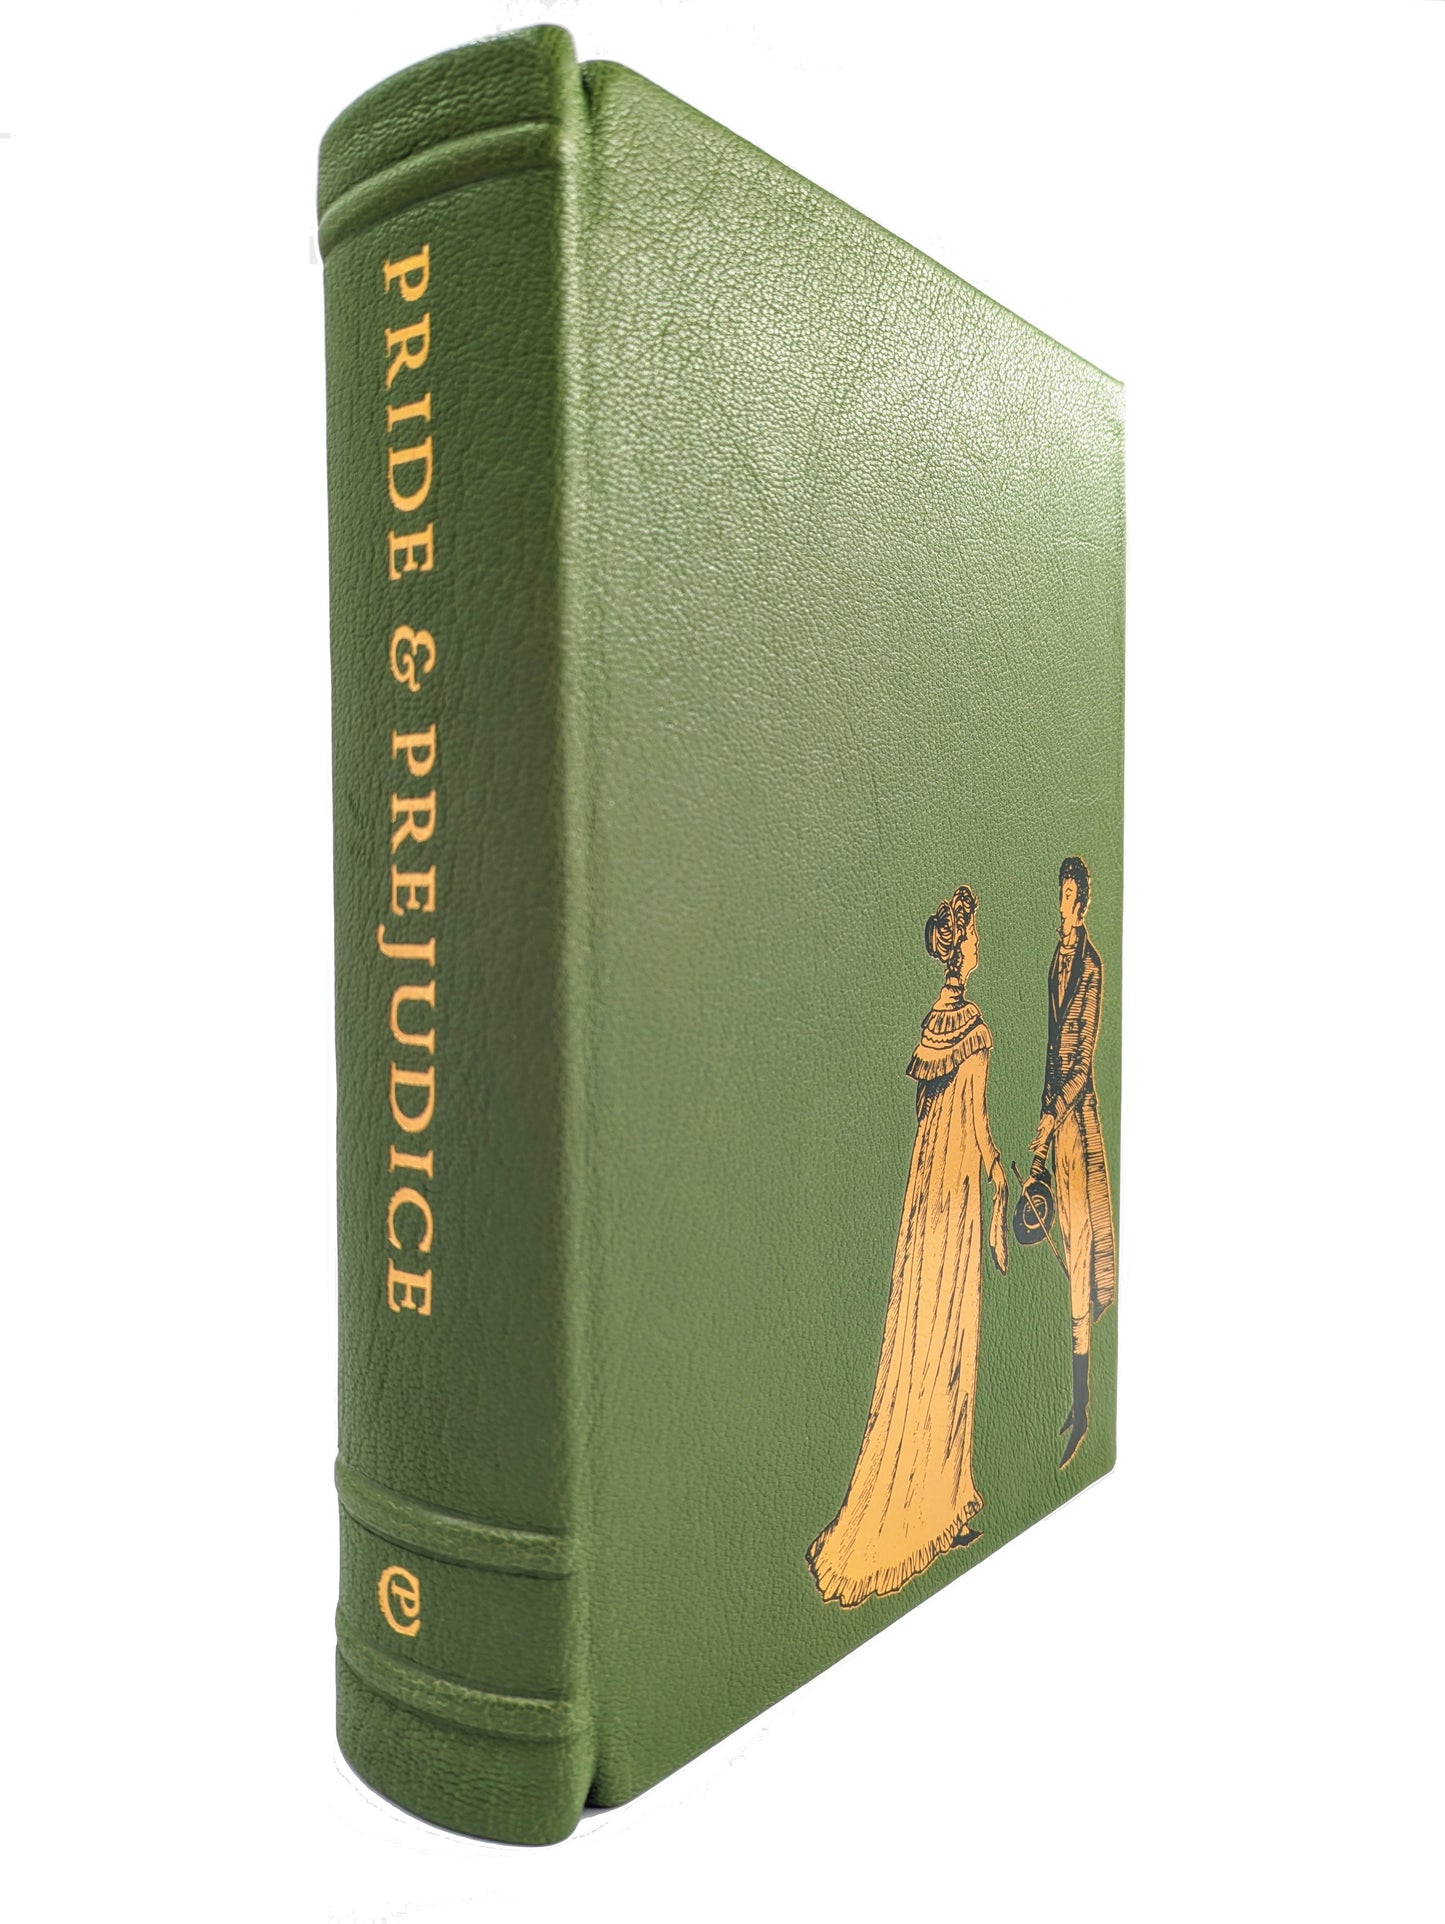 Pride and Prejudice by Jane Austen - Deluxe Edition